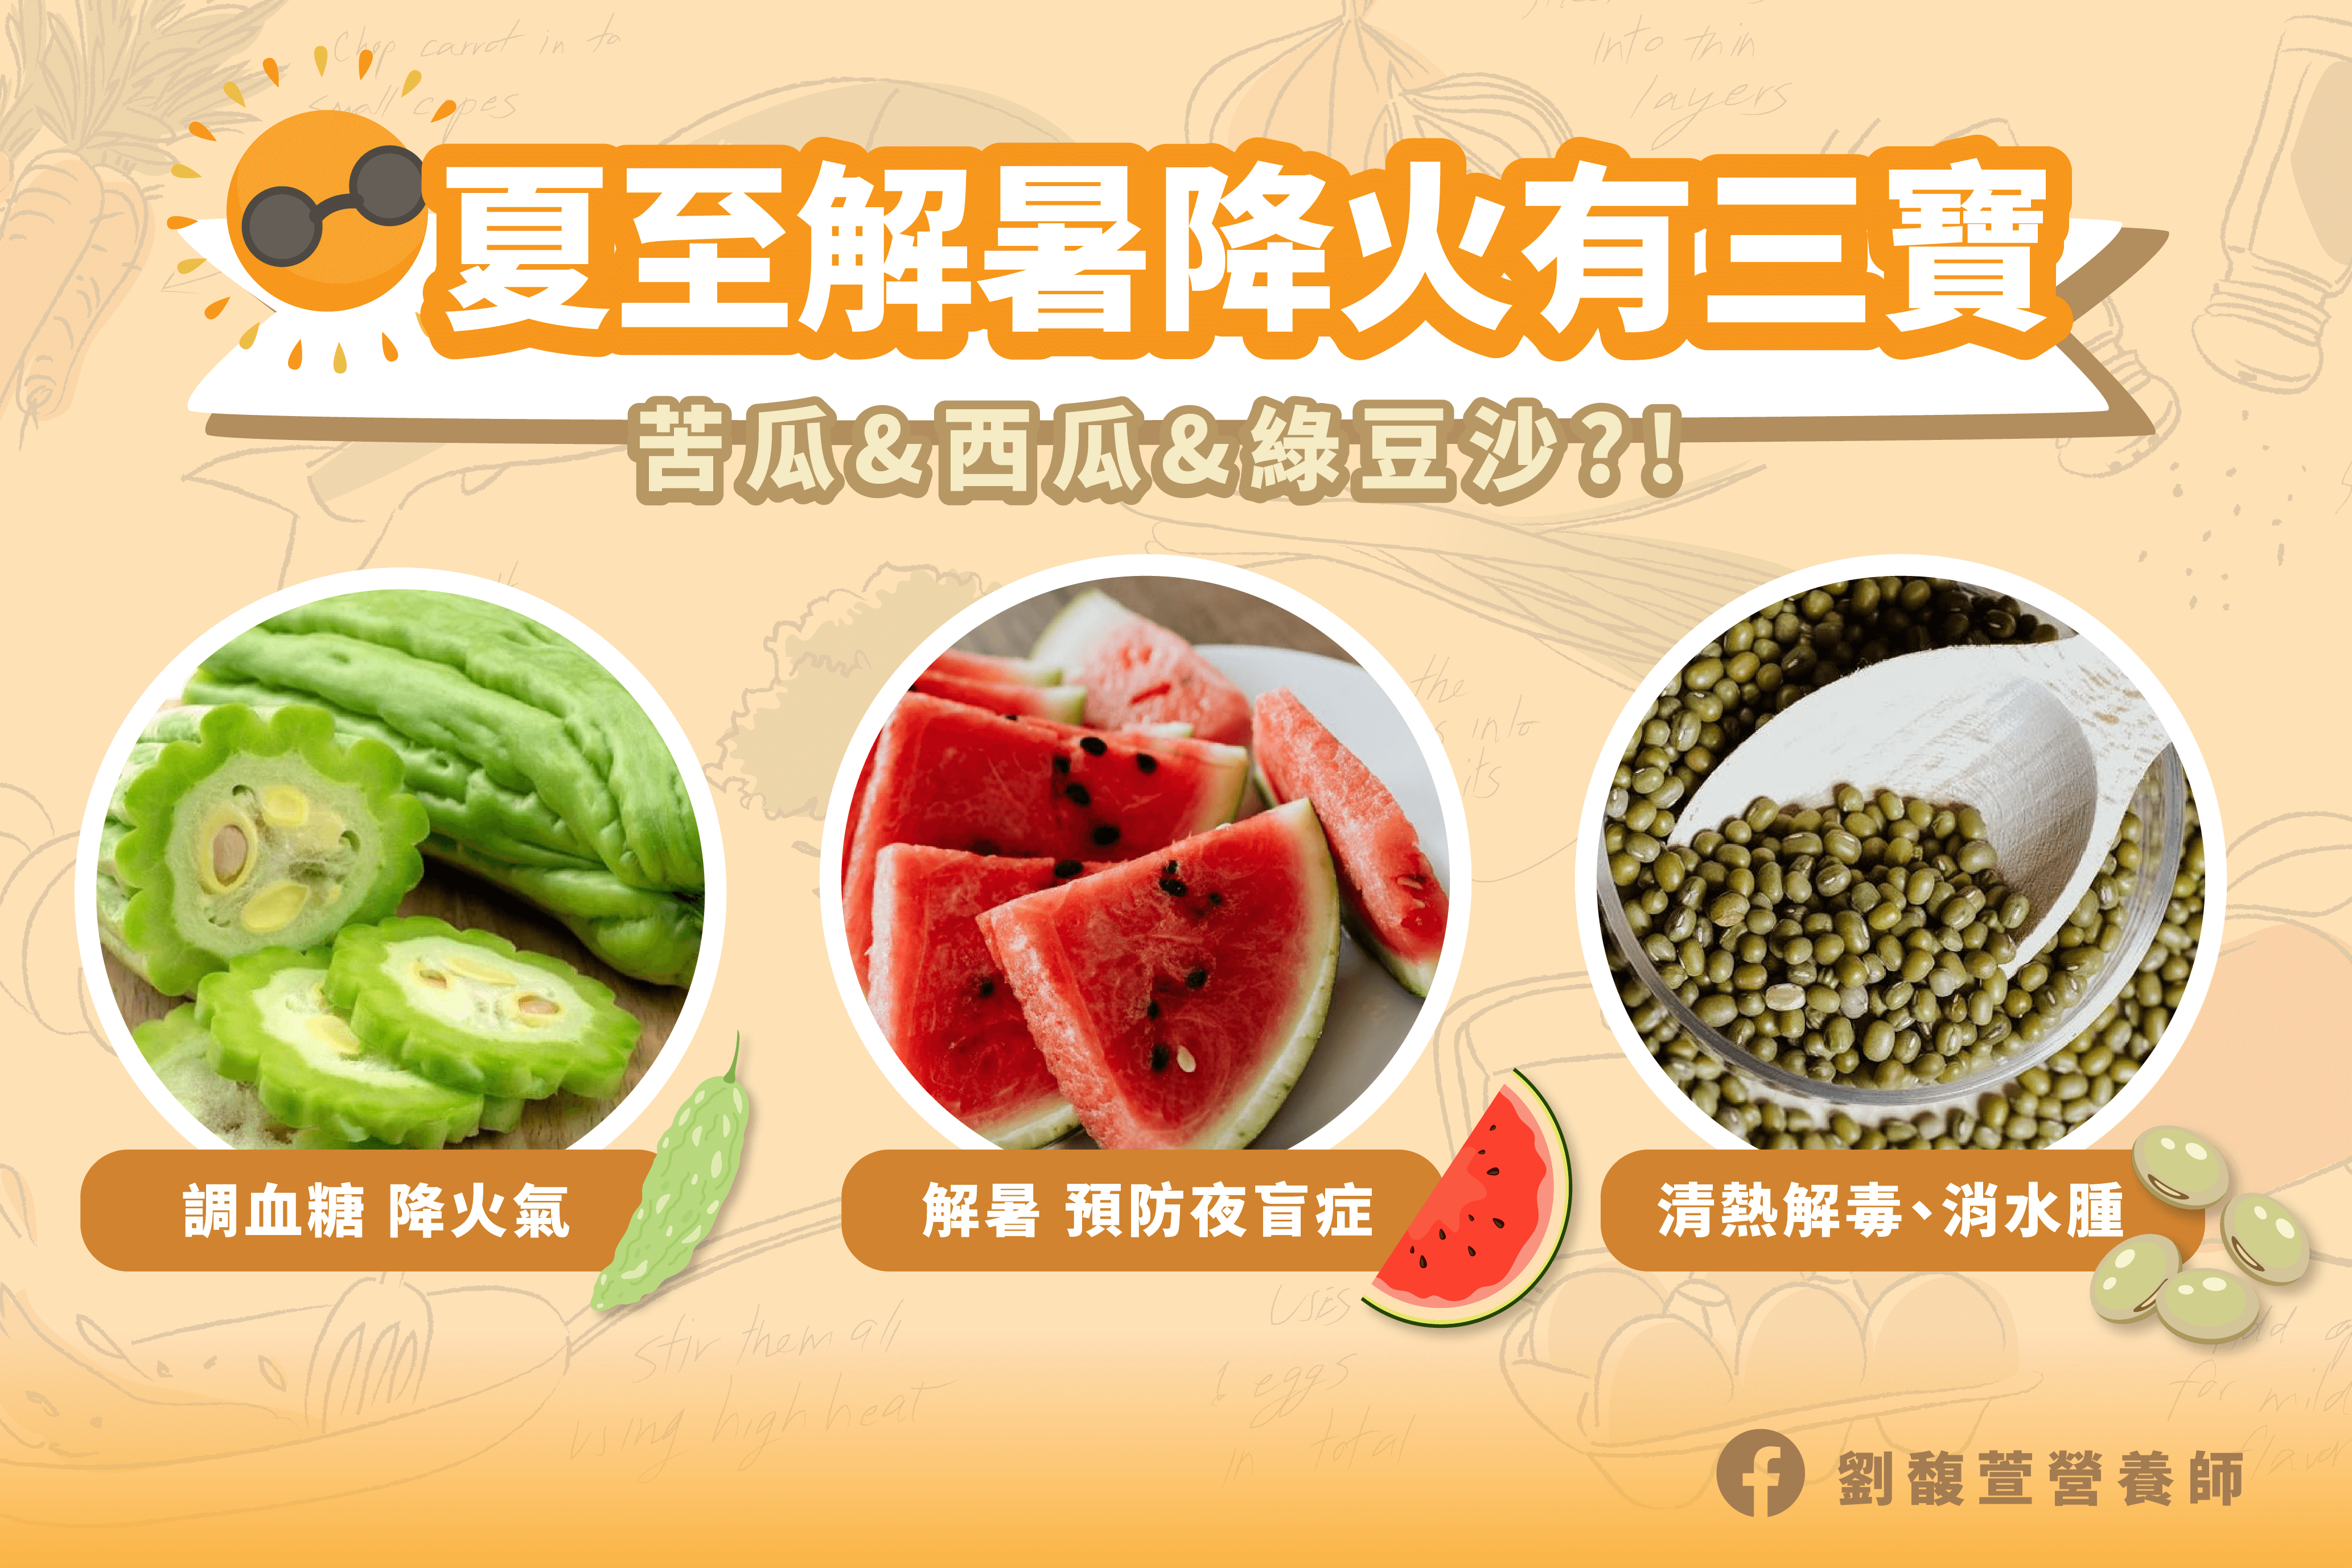 Read more about the article 「夏至」！這3種食物健康又開胃解暑